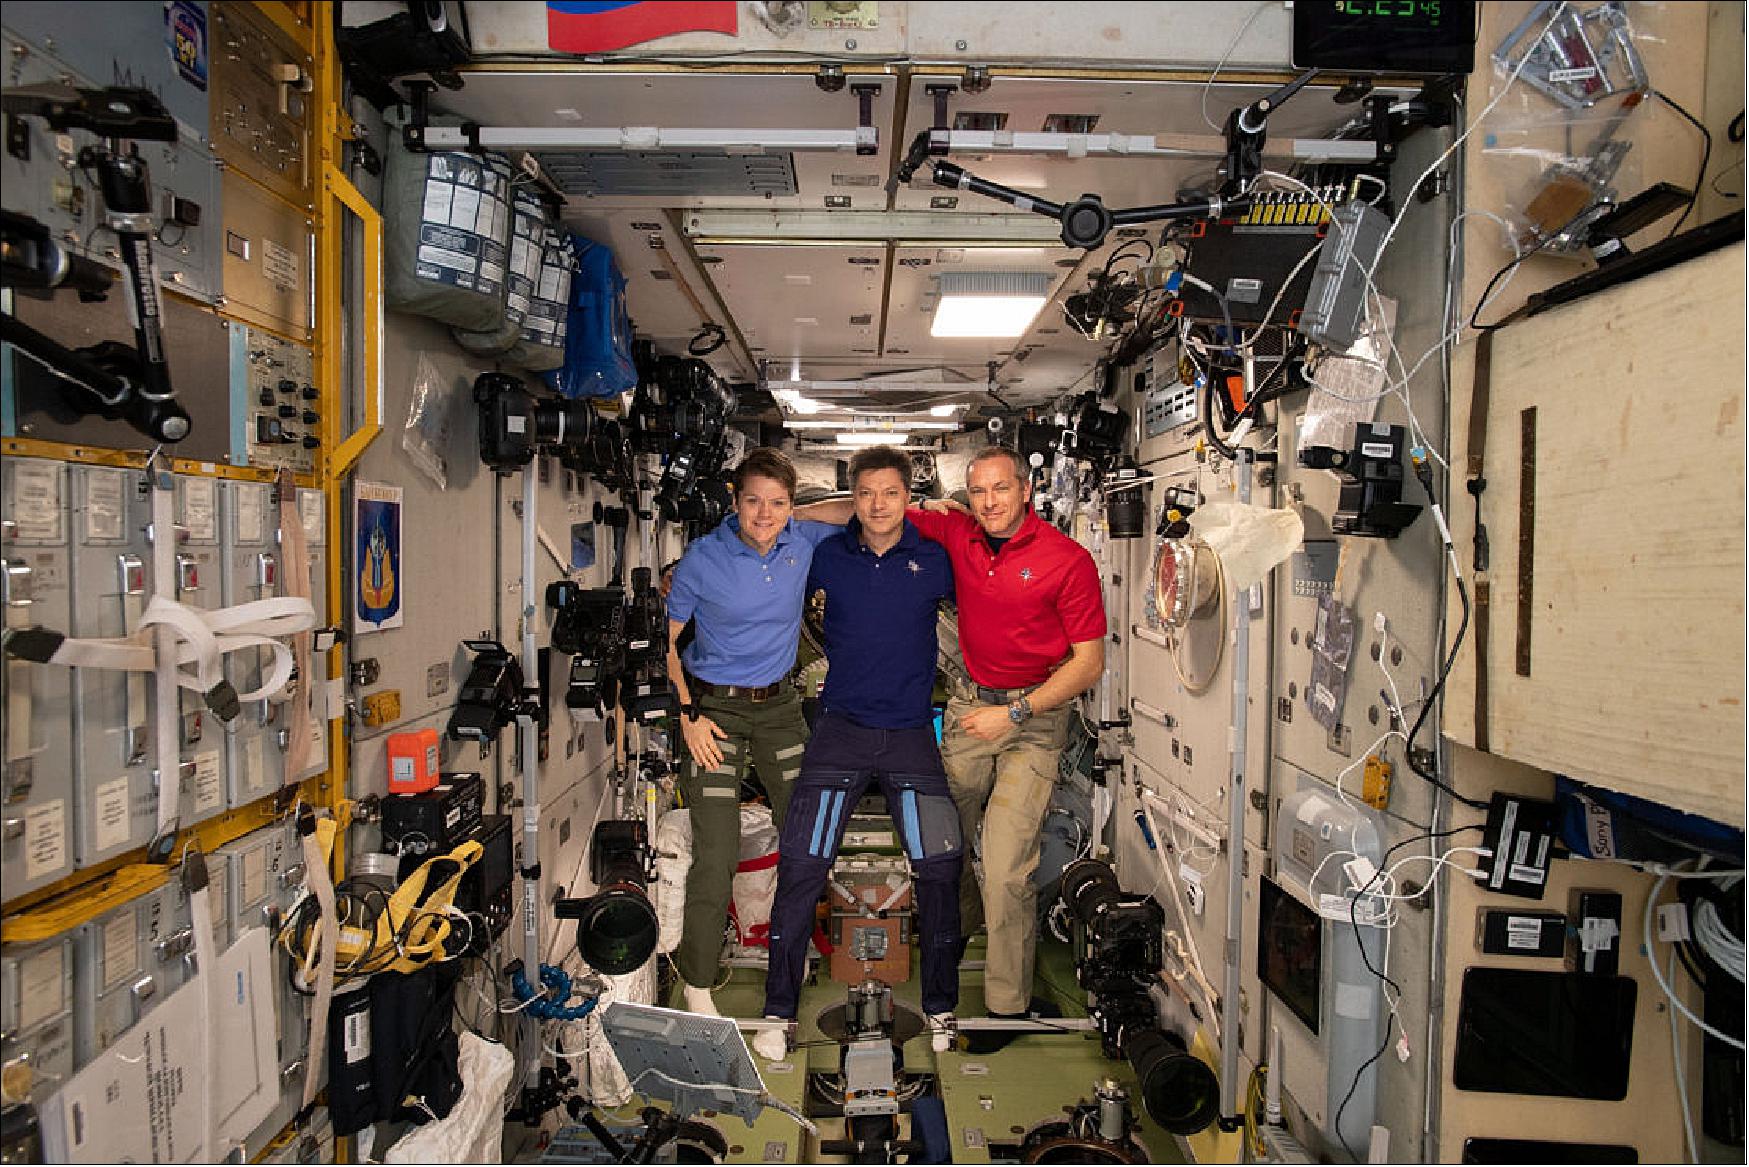 Figure 116: Expedition 58 crew members gather inside the Zvezda service module onboard the International Space Station for a crew portrait. From left are, NASA astronaut Anne McClain, Roscosmos cosmonaut Oleg Kononenko and Canadian Space Agency astronaut David Saint-Jacques (image credit: NASA)